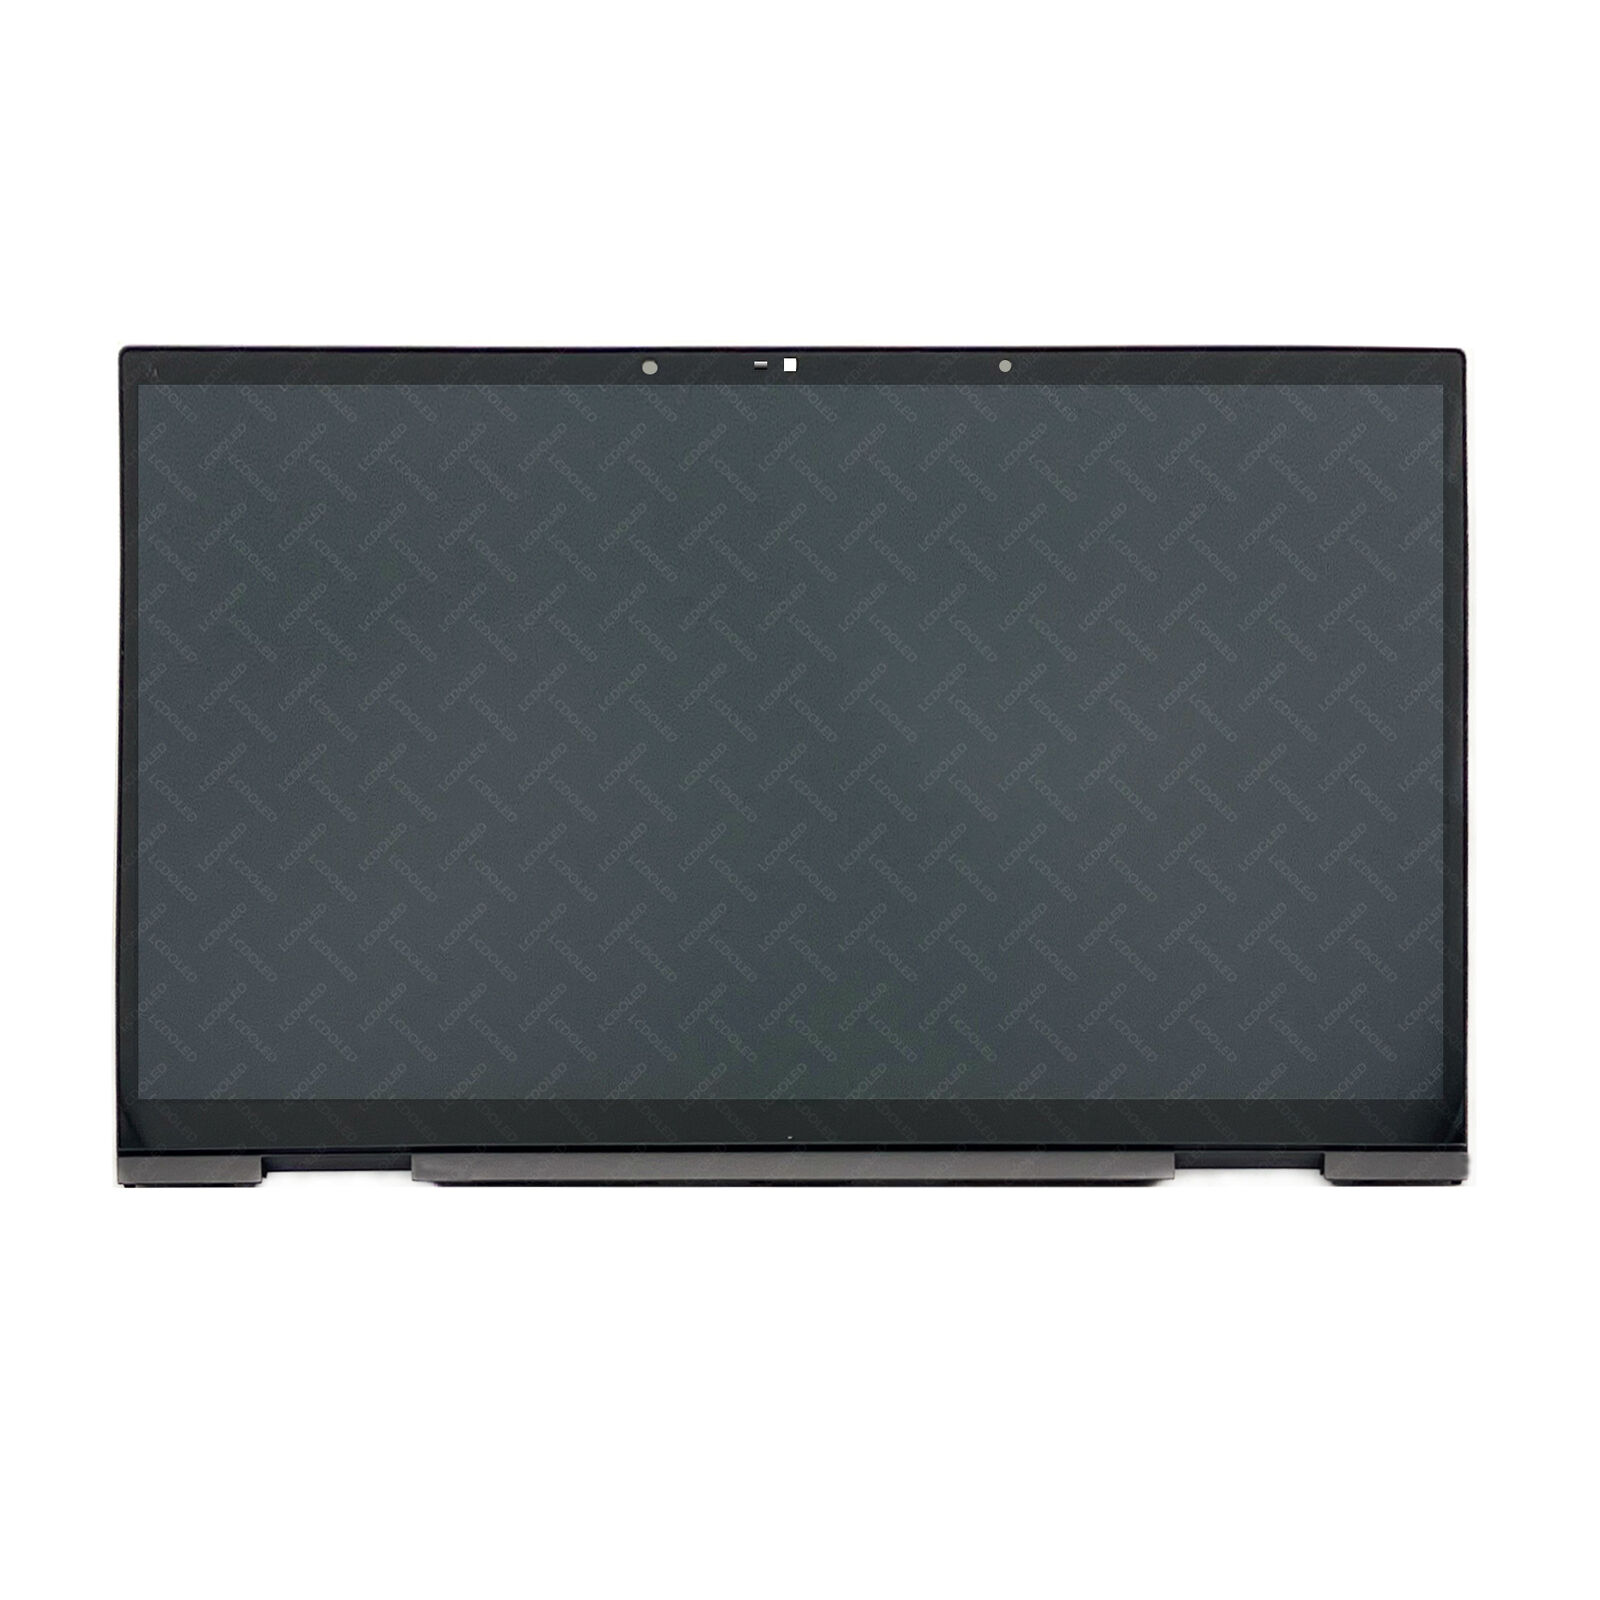 FHD LCD Touch Screen Assembly Digitizer for HP Envy x360 15-ey0013dx 15-ey0023dx